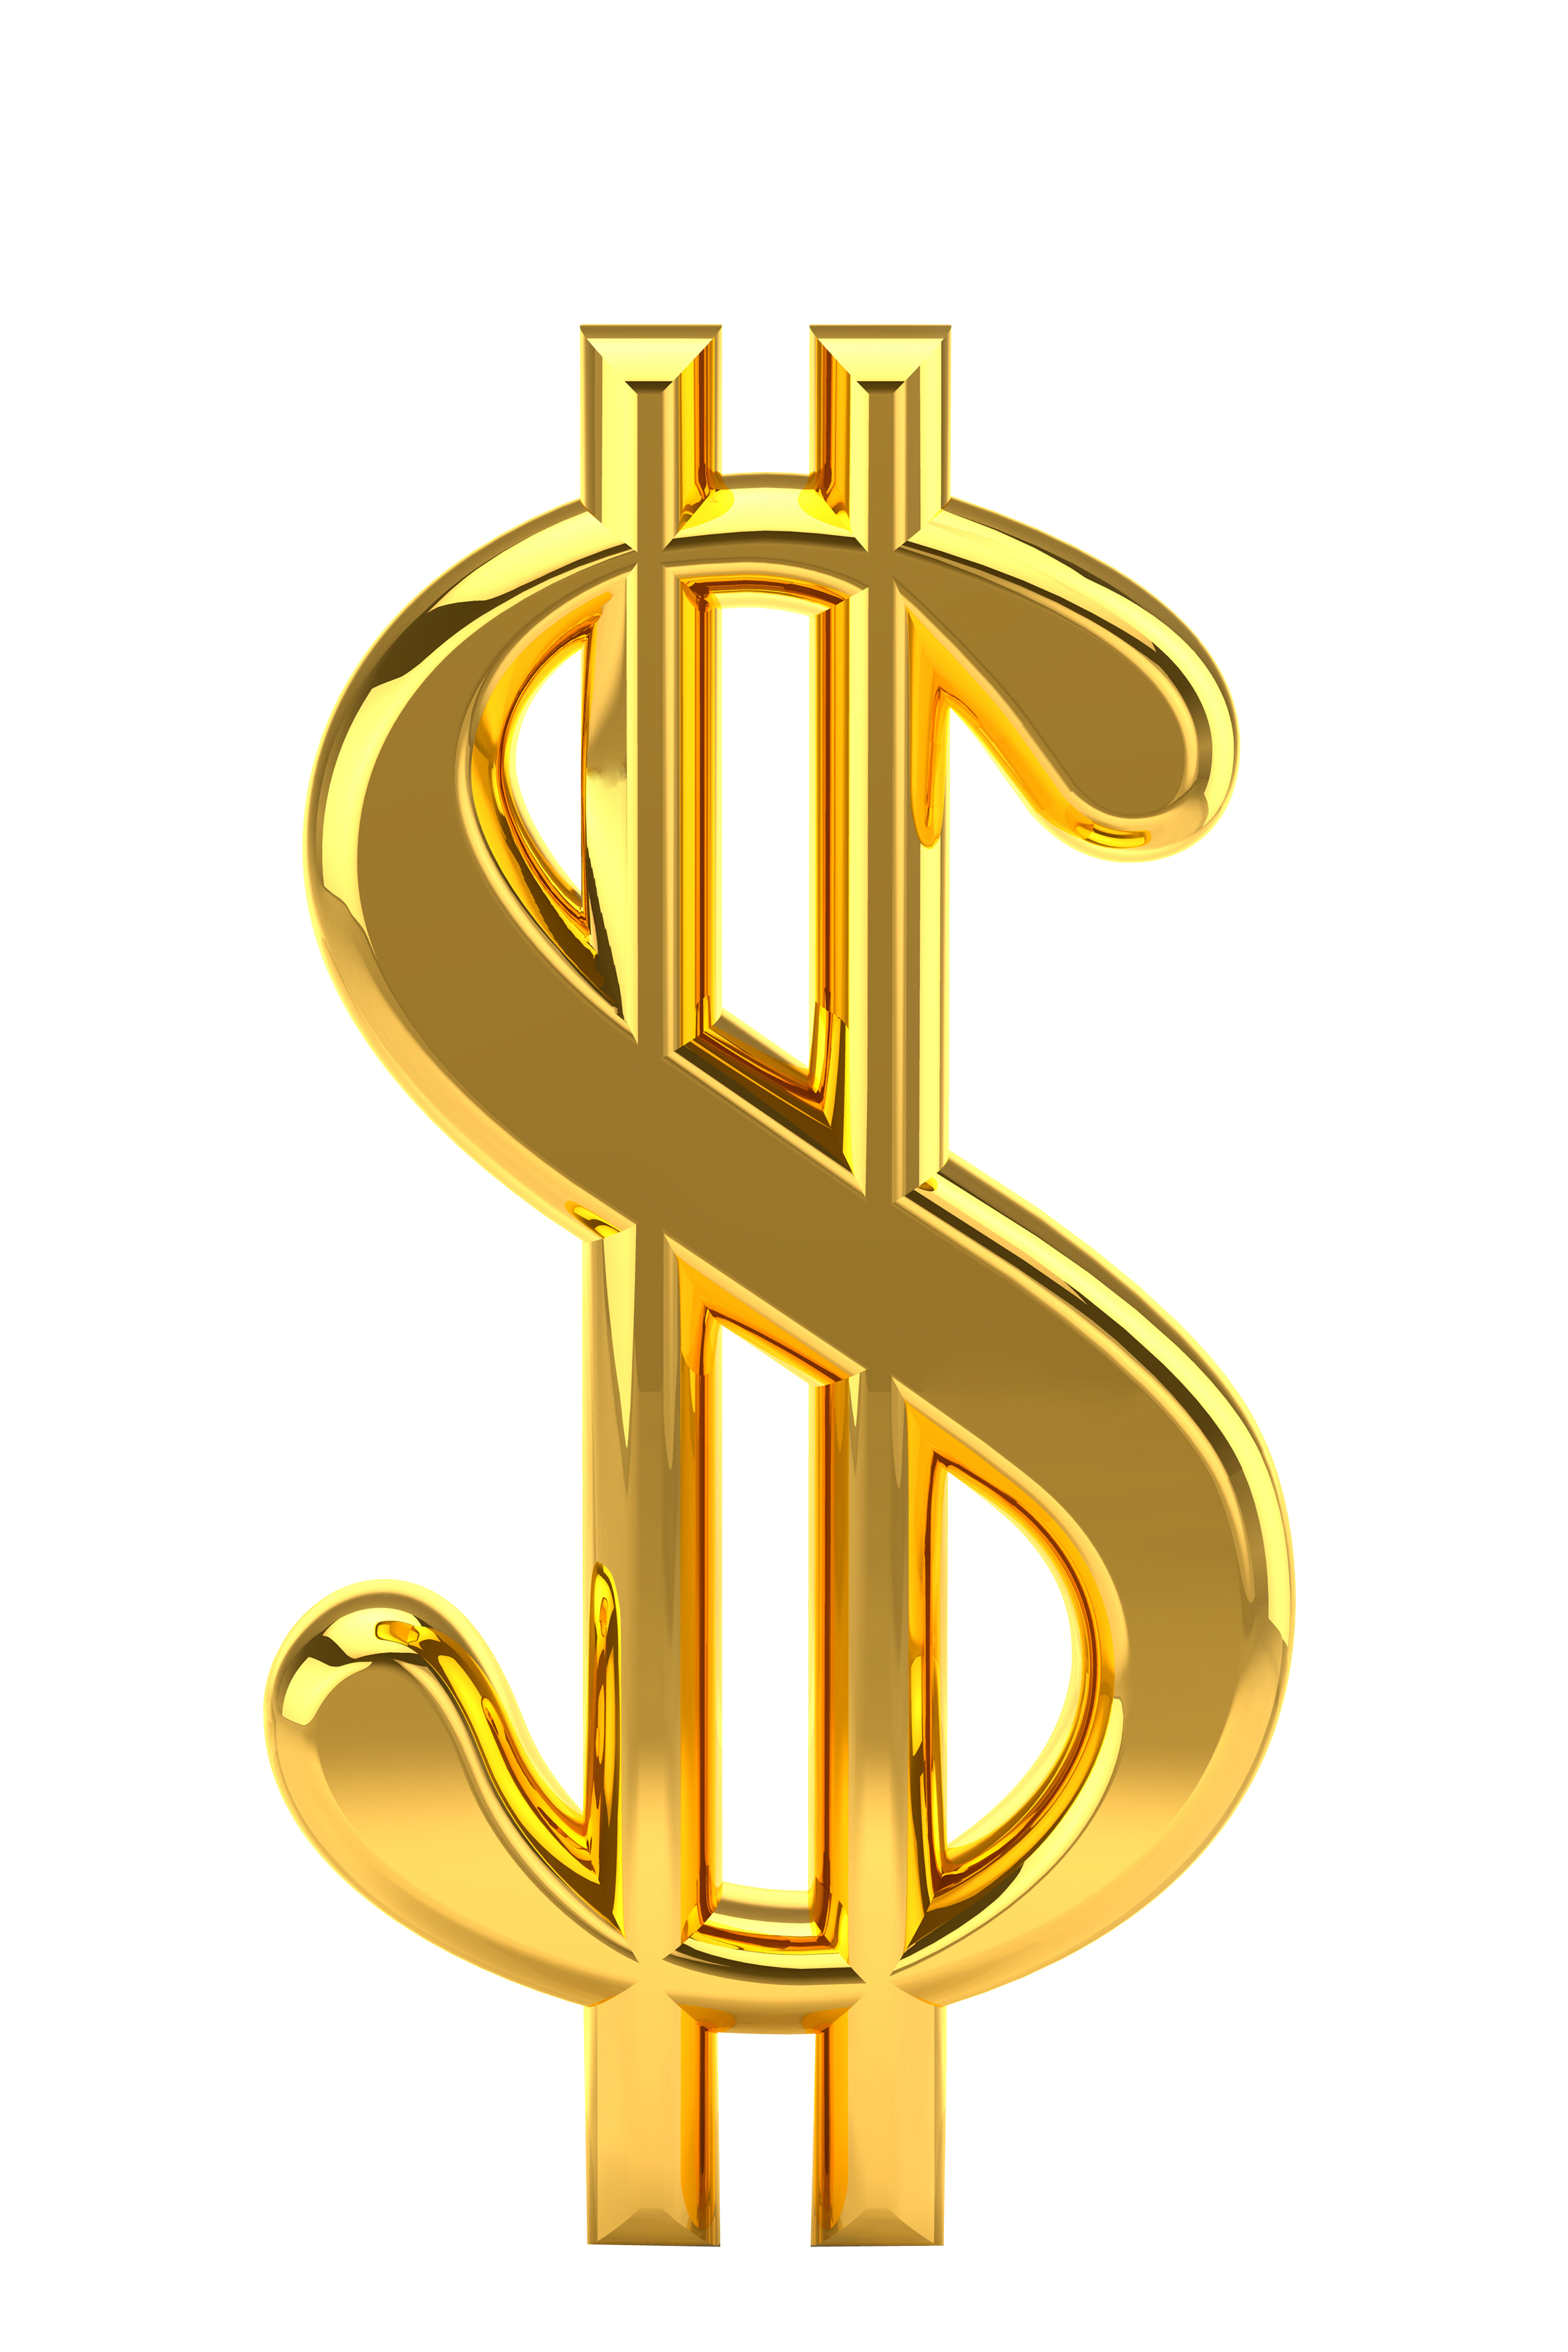 United Gold Dollar Sign States Sign,Money,Golden,Financial Coin PNG Image